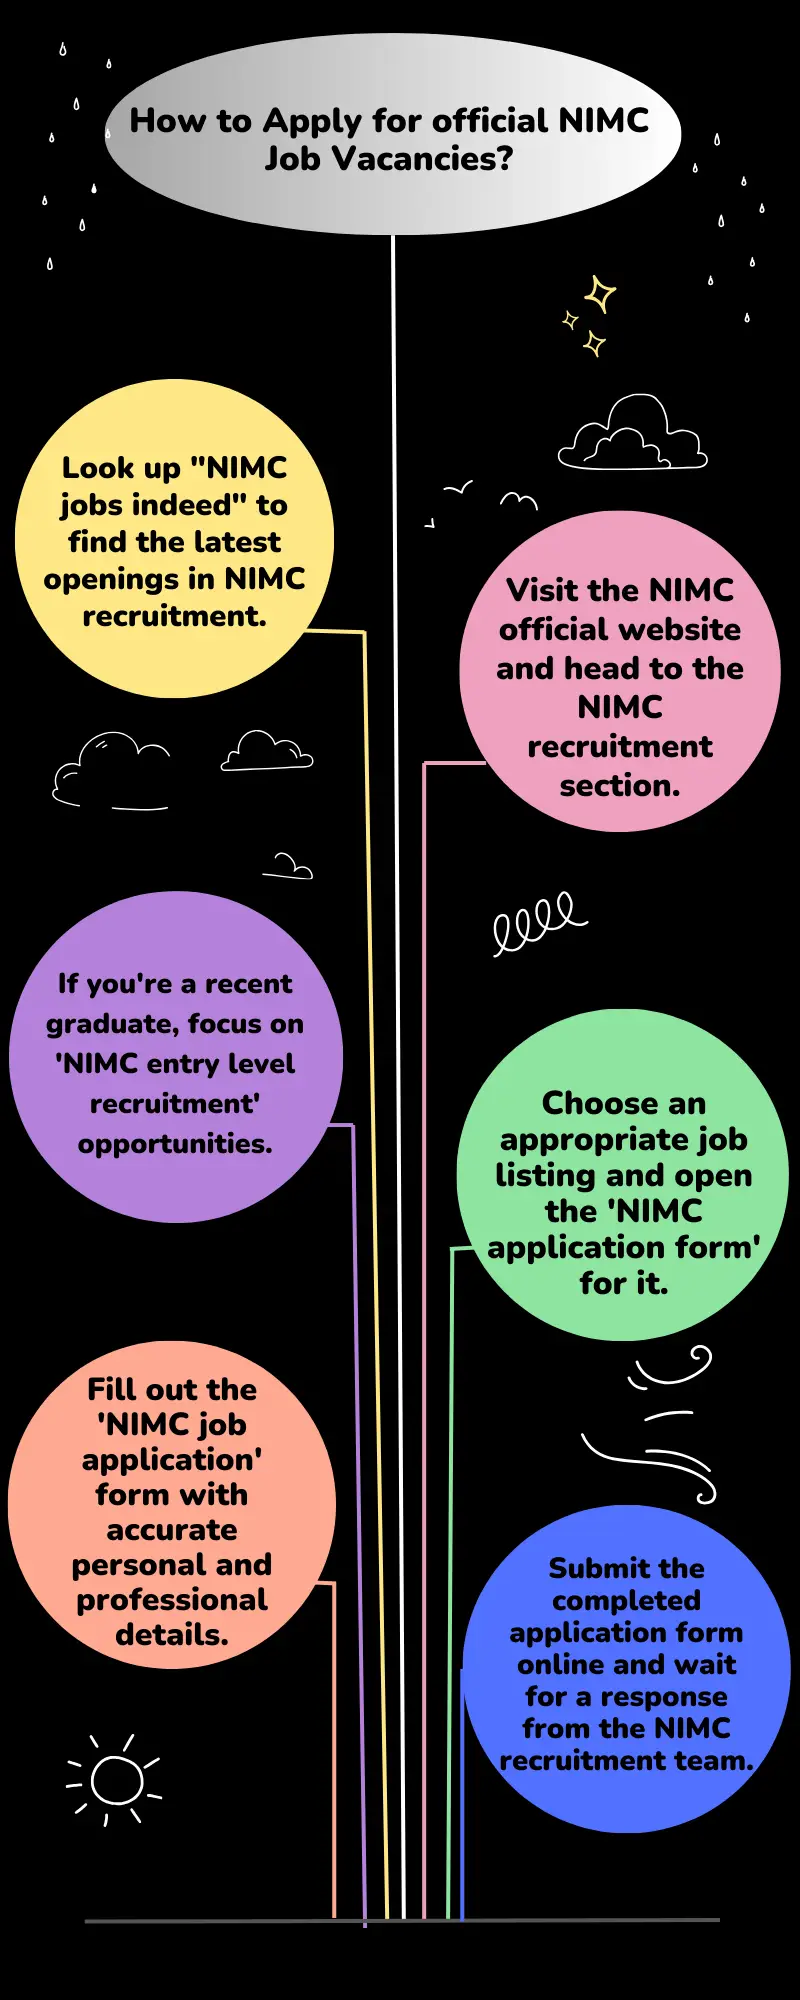 How to Apply for official NIMC Job Vacancies?